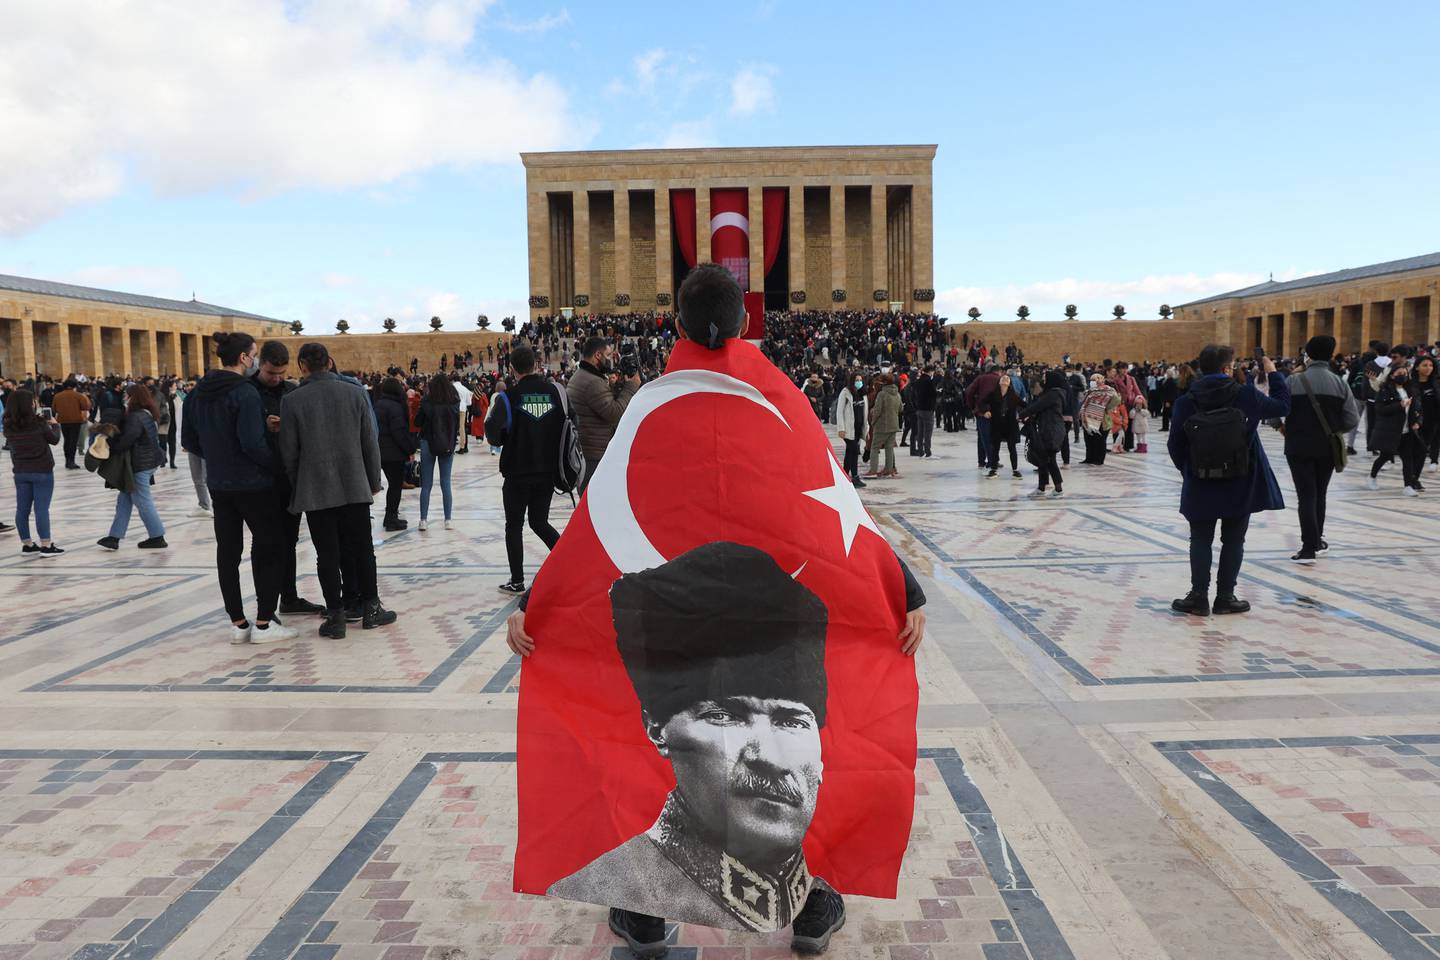 A person with a flag bearing the image of Turkey's founder Mustafa Kemal Ataturk, at the Anitkabir Mausoleum, to mark his 83rd death anniversary, in Ankara on November 10, 2021. AFP